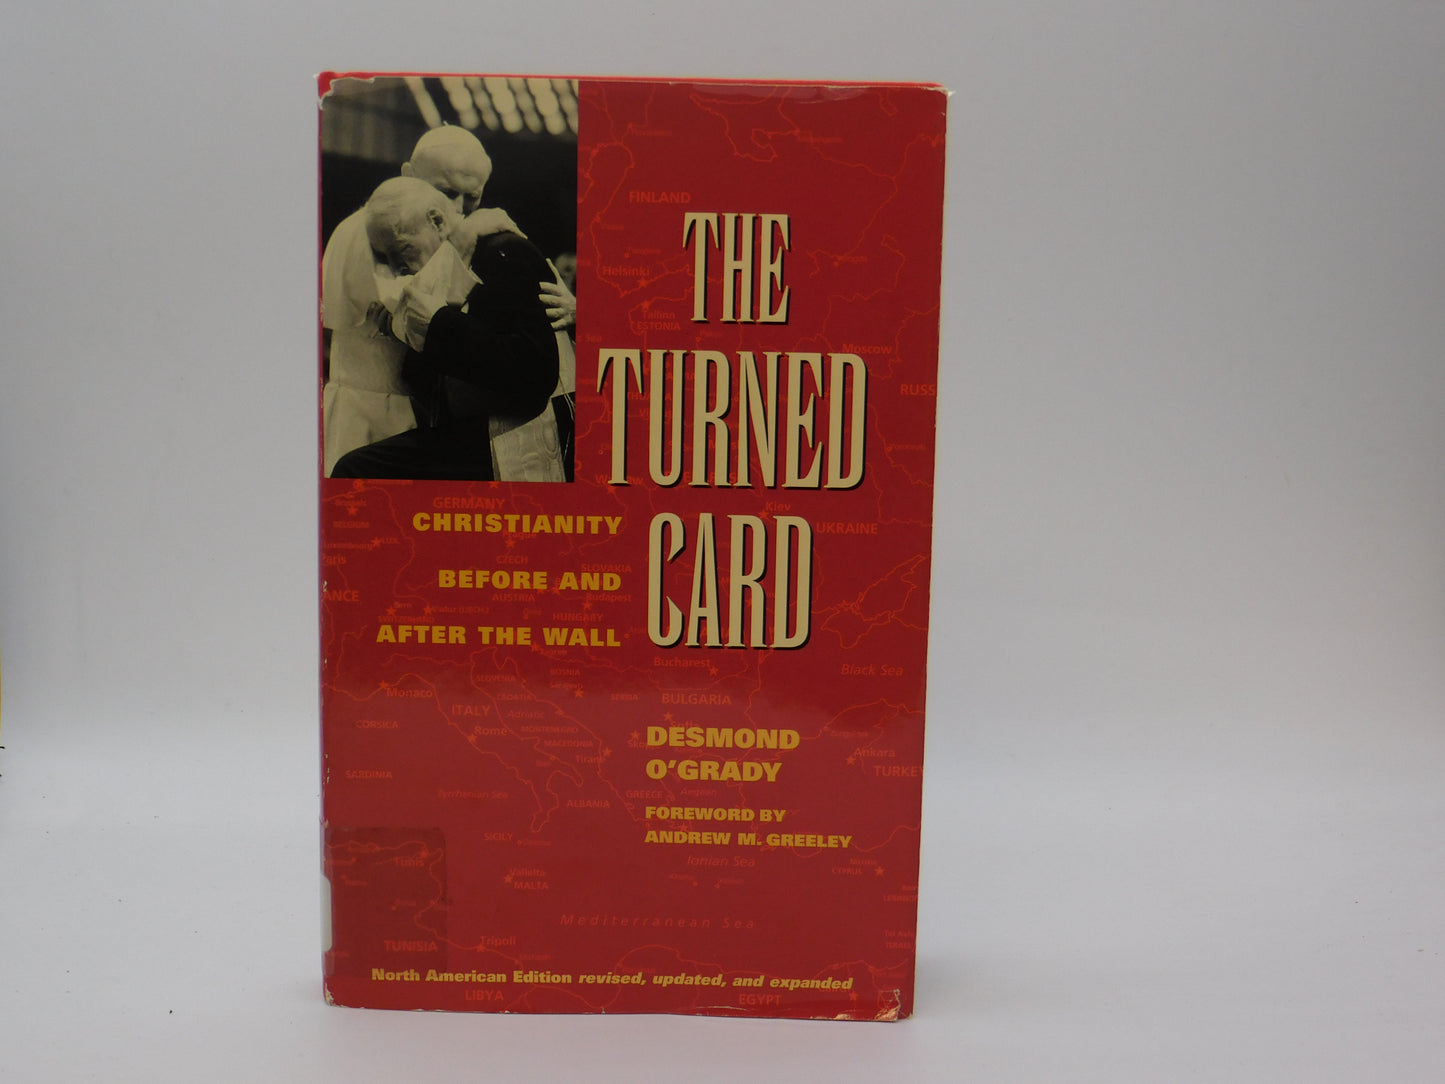 The Turned Card: Christianity Before and After the Wall by Desmond O'Grady